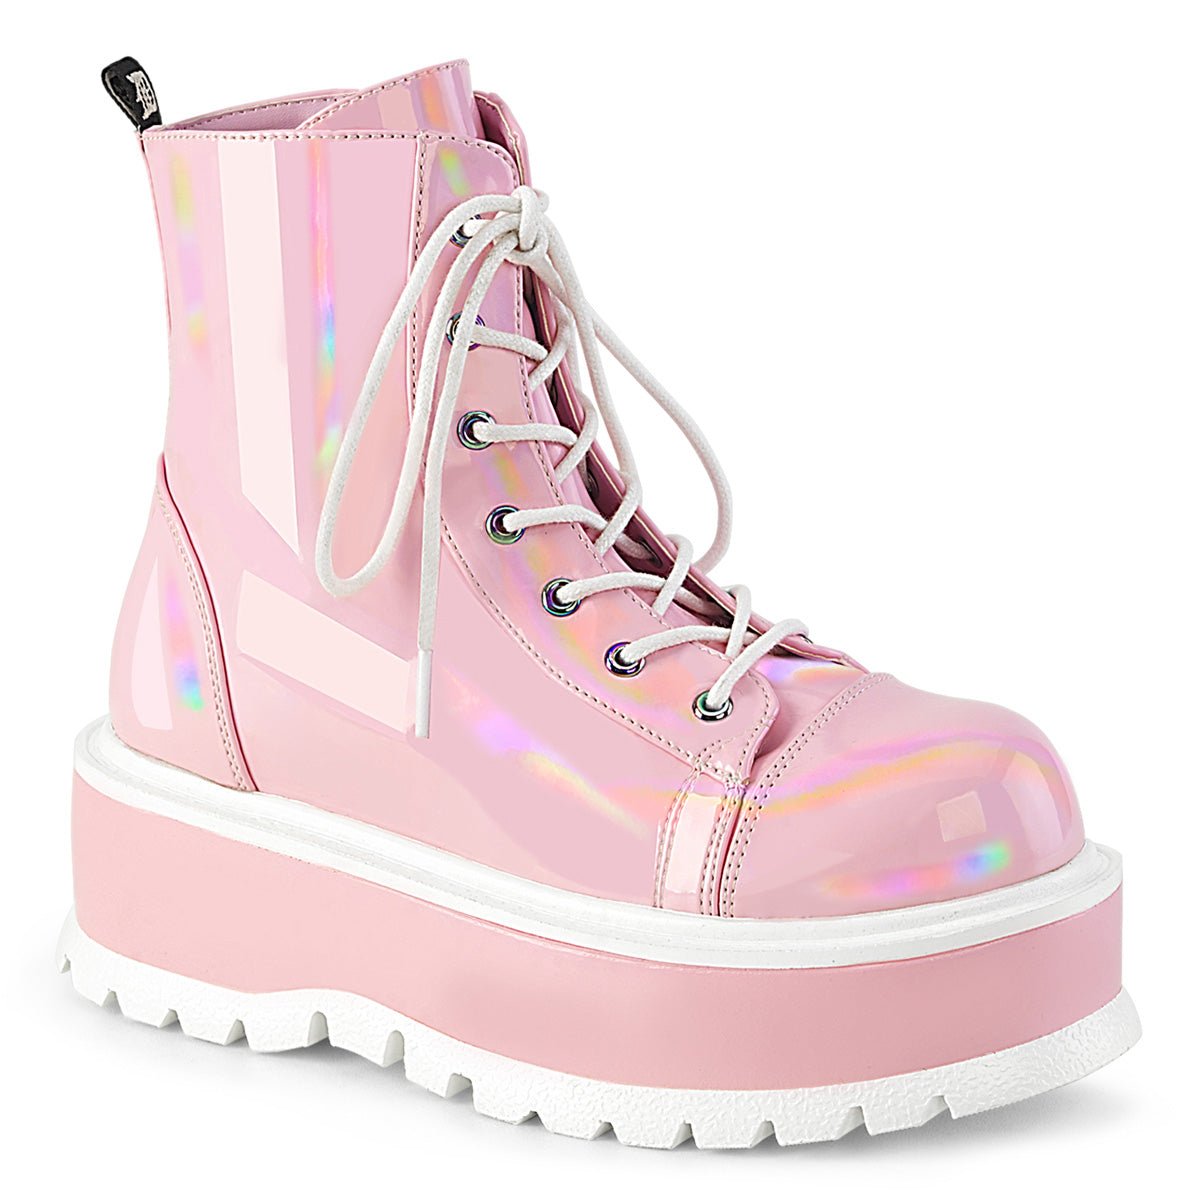 Too Fast | Demonia Slacker 55 | Baby Pink Hologram Patent Women&#39;s Ankle Boots